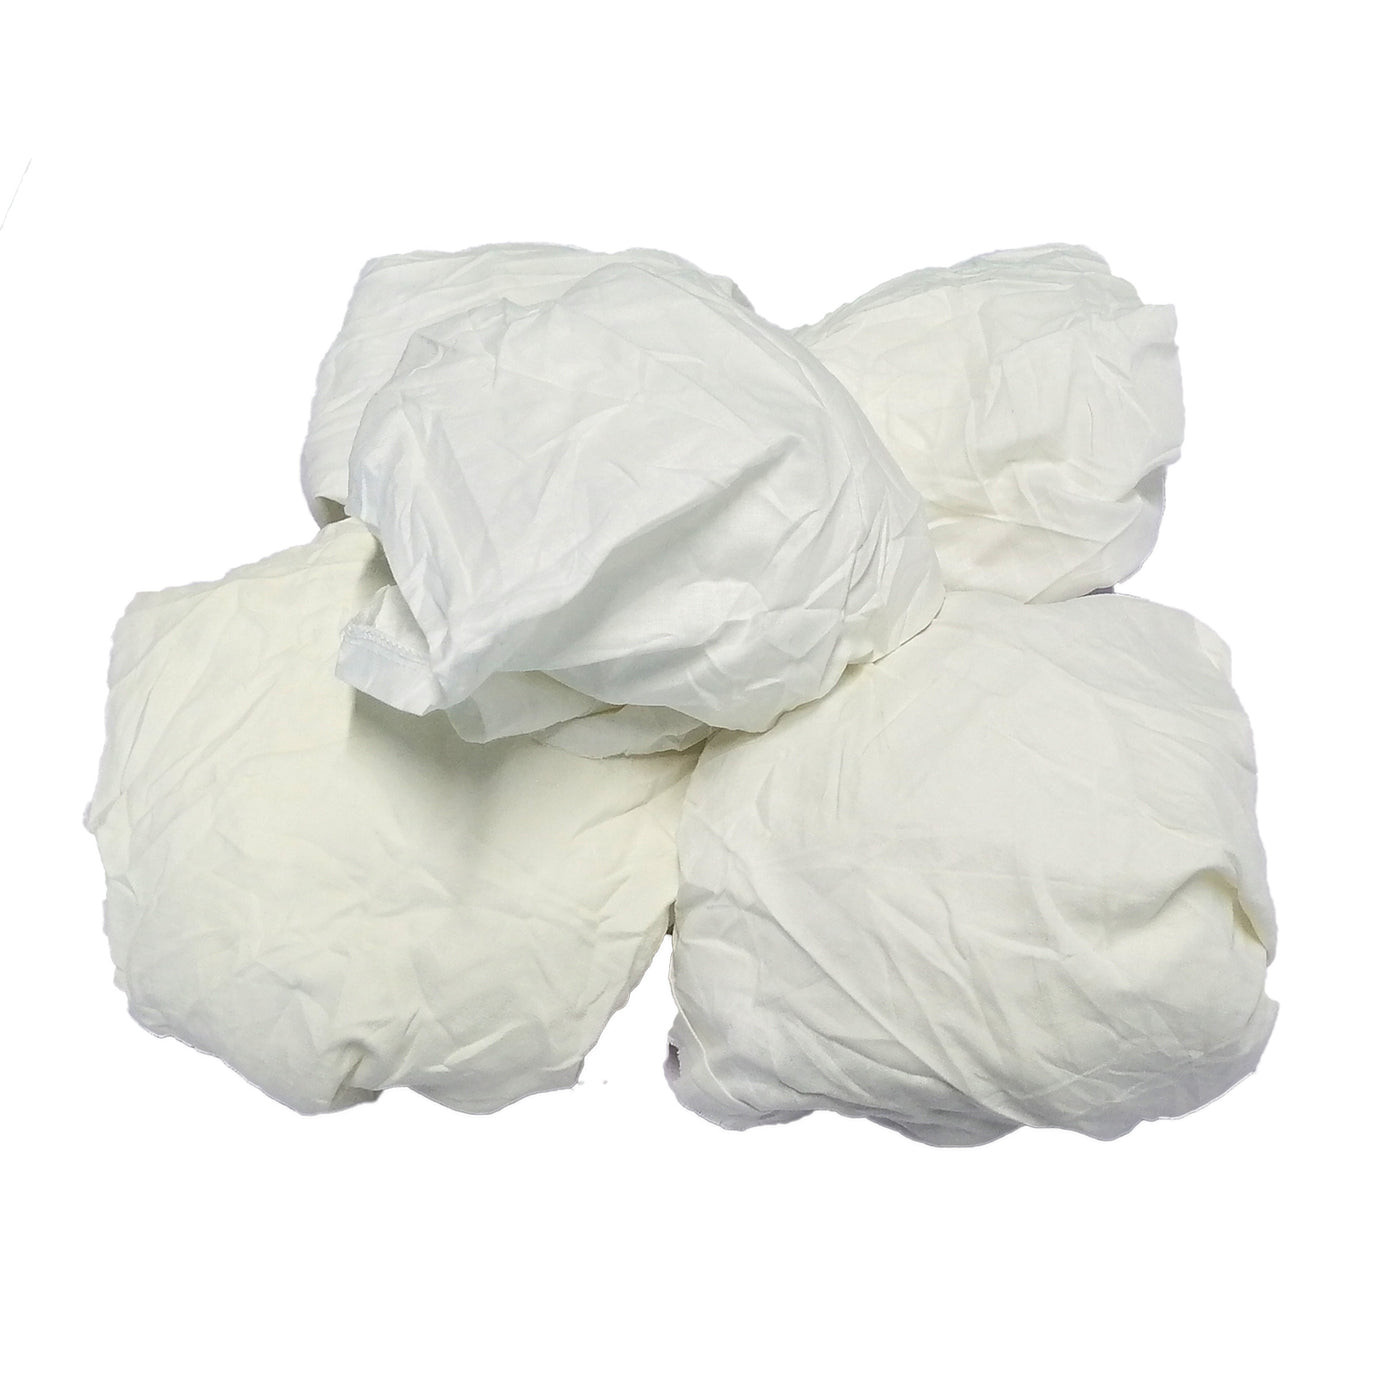 White Flannel/Thermal Wiping Rags - 25 lbs Box